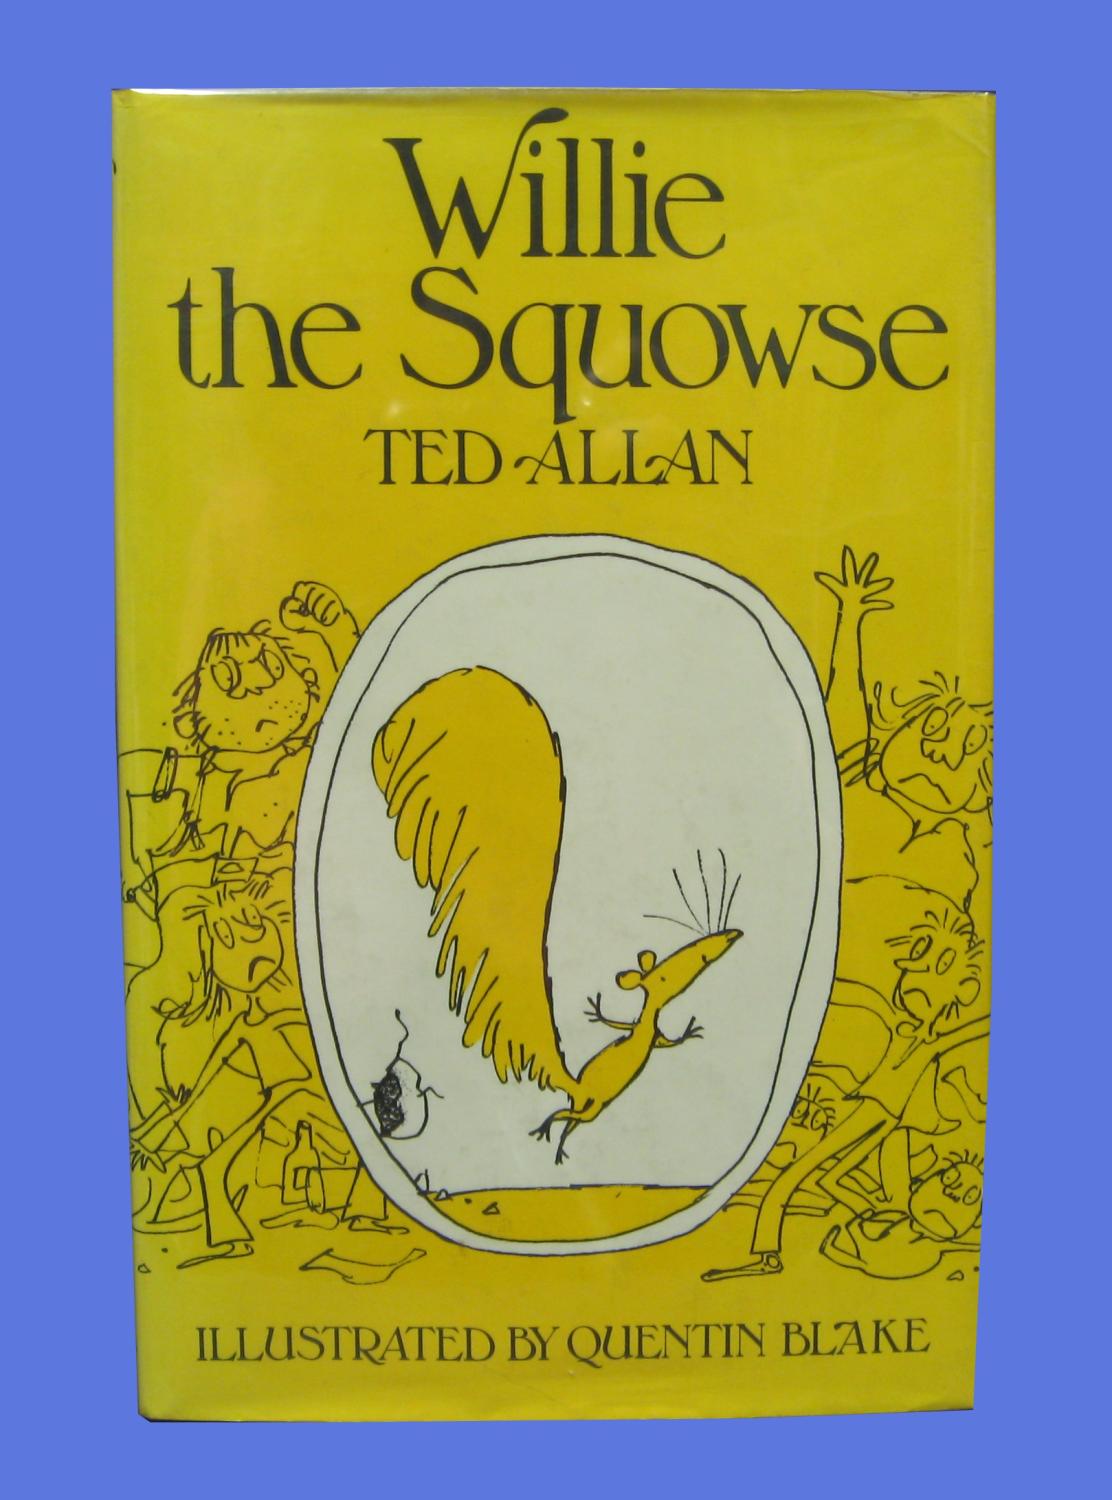 Willie the Squowse TED ALLAN